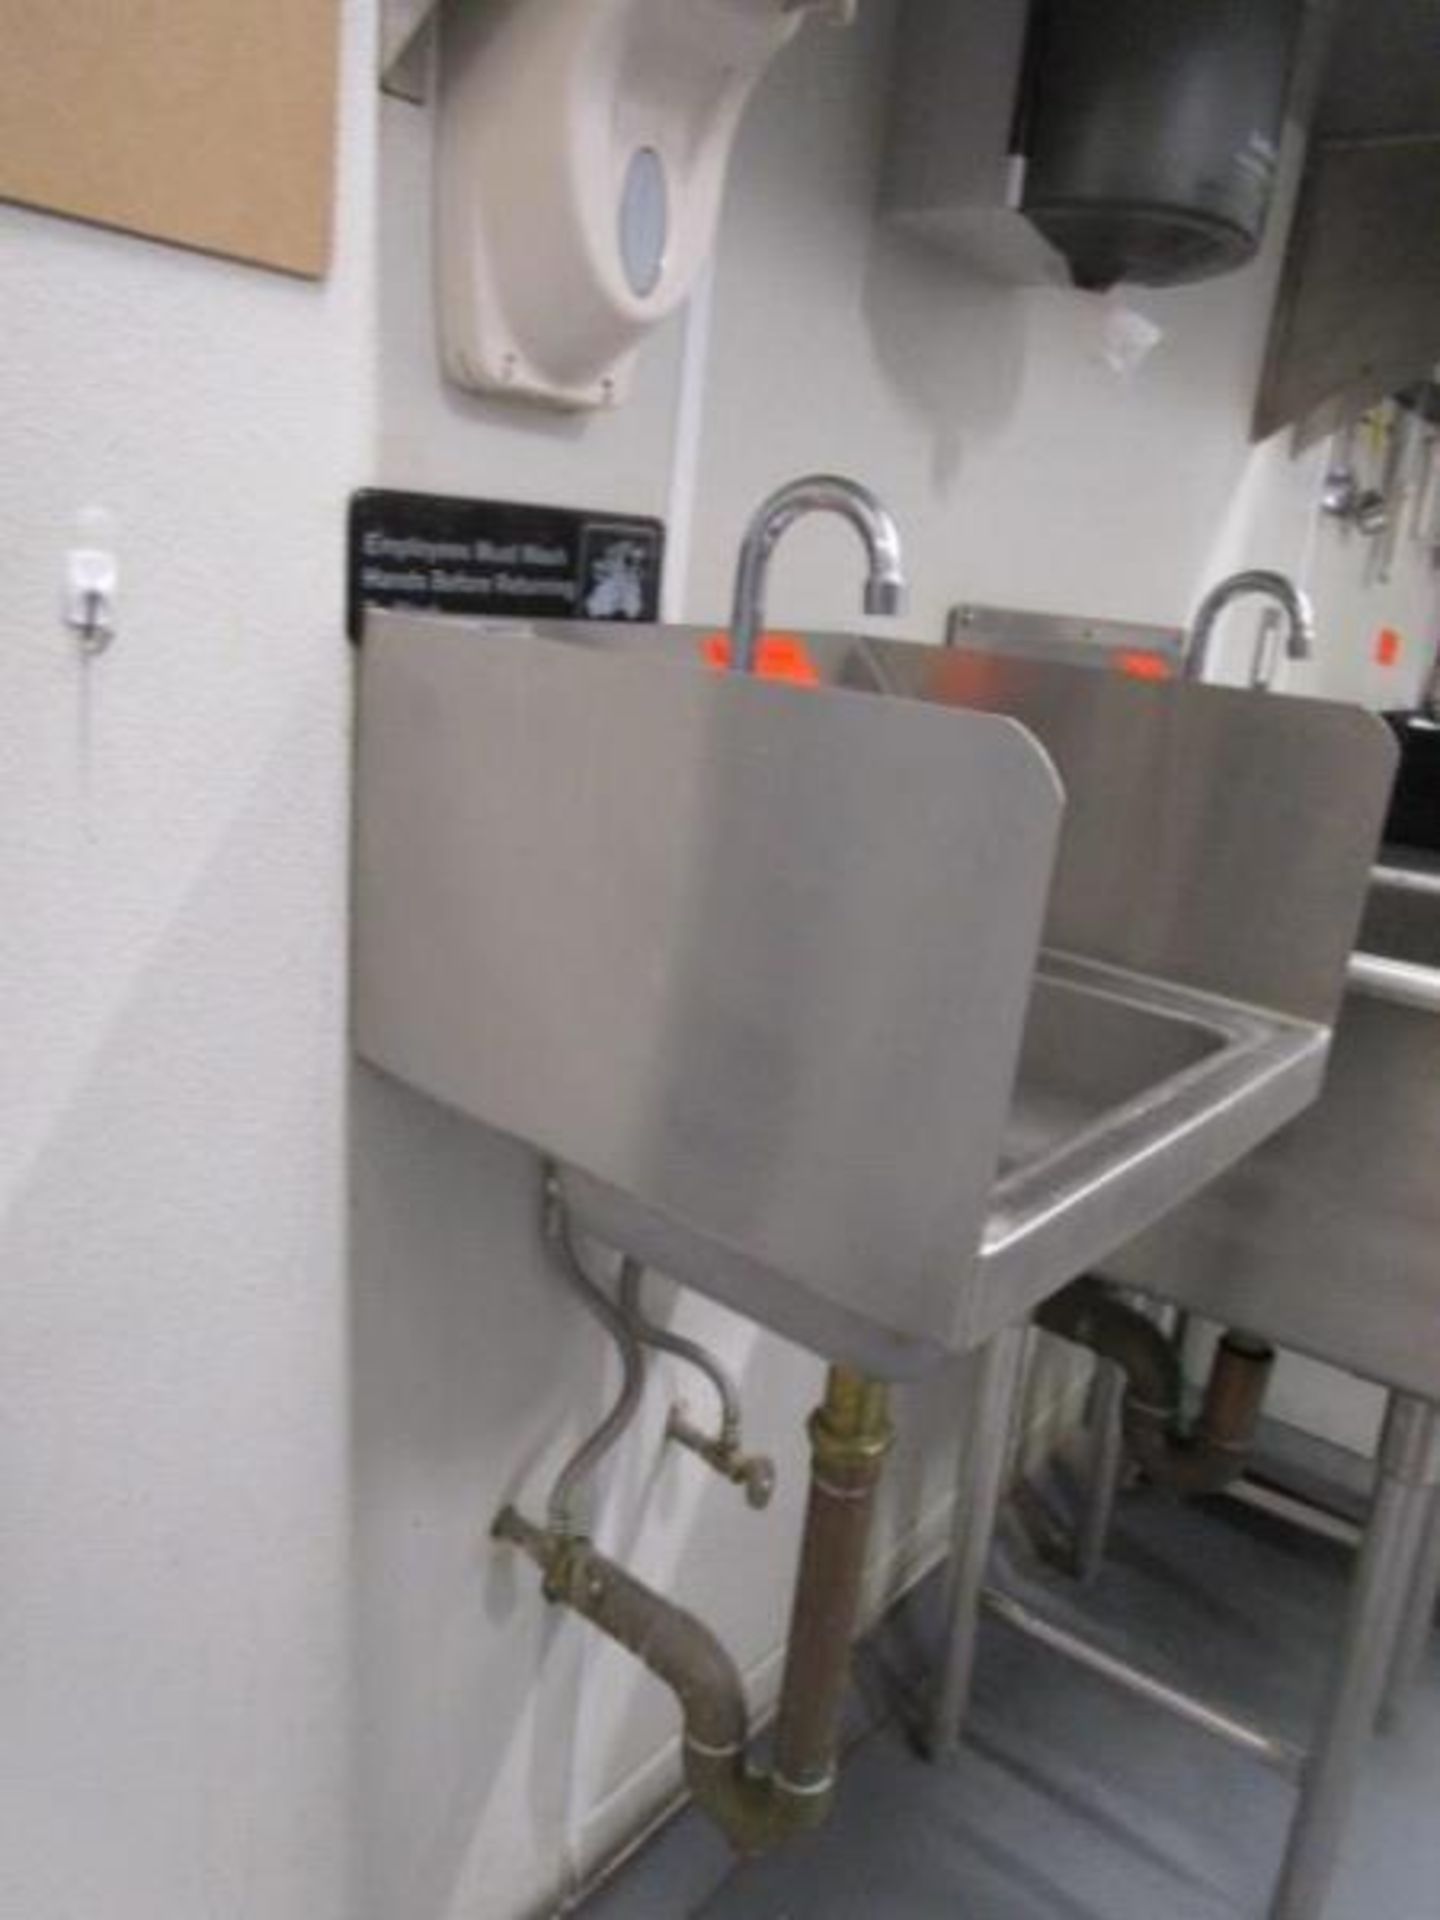 Stainless Steel Hand Sink w/ Dual Side Splash Guards, - Image 2 of 3